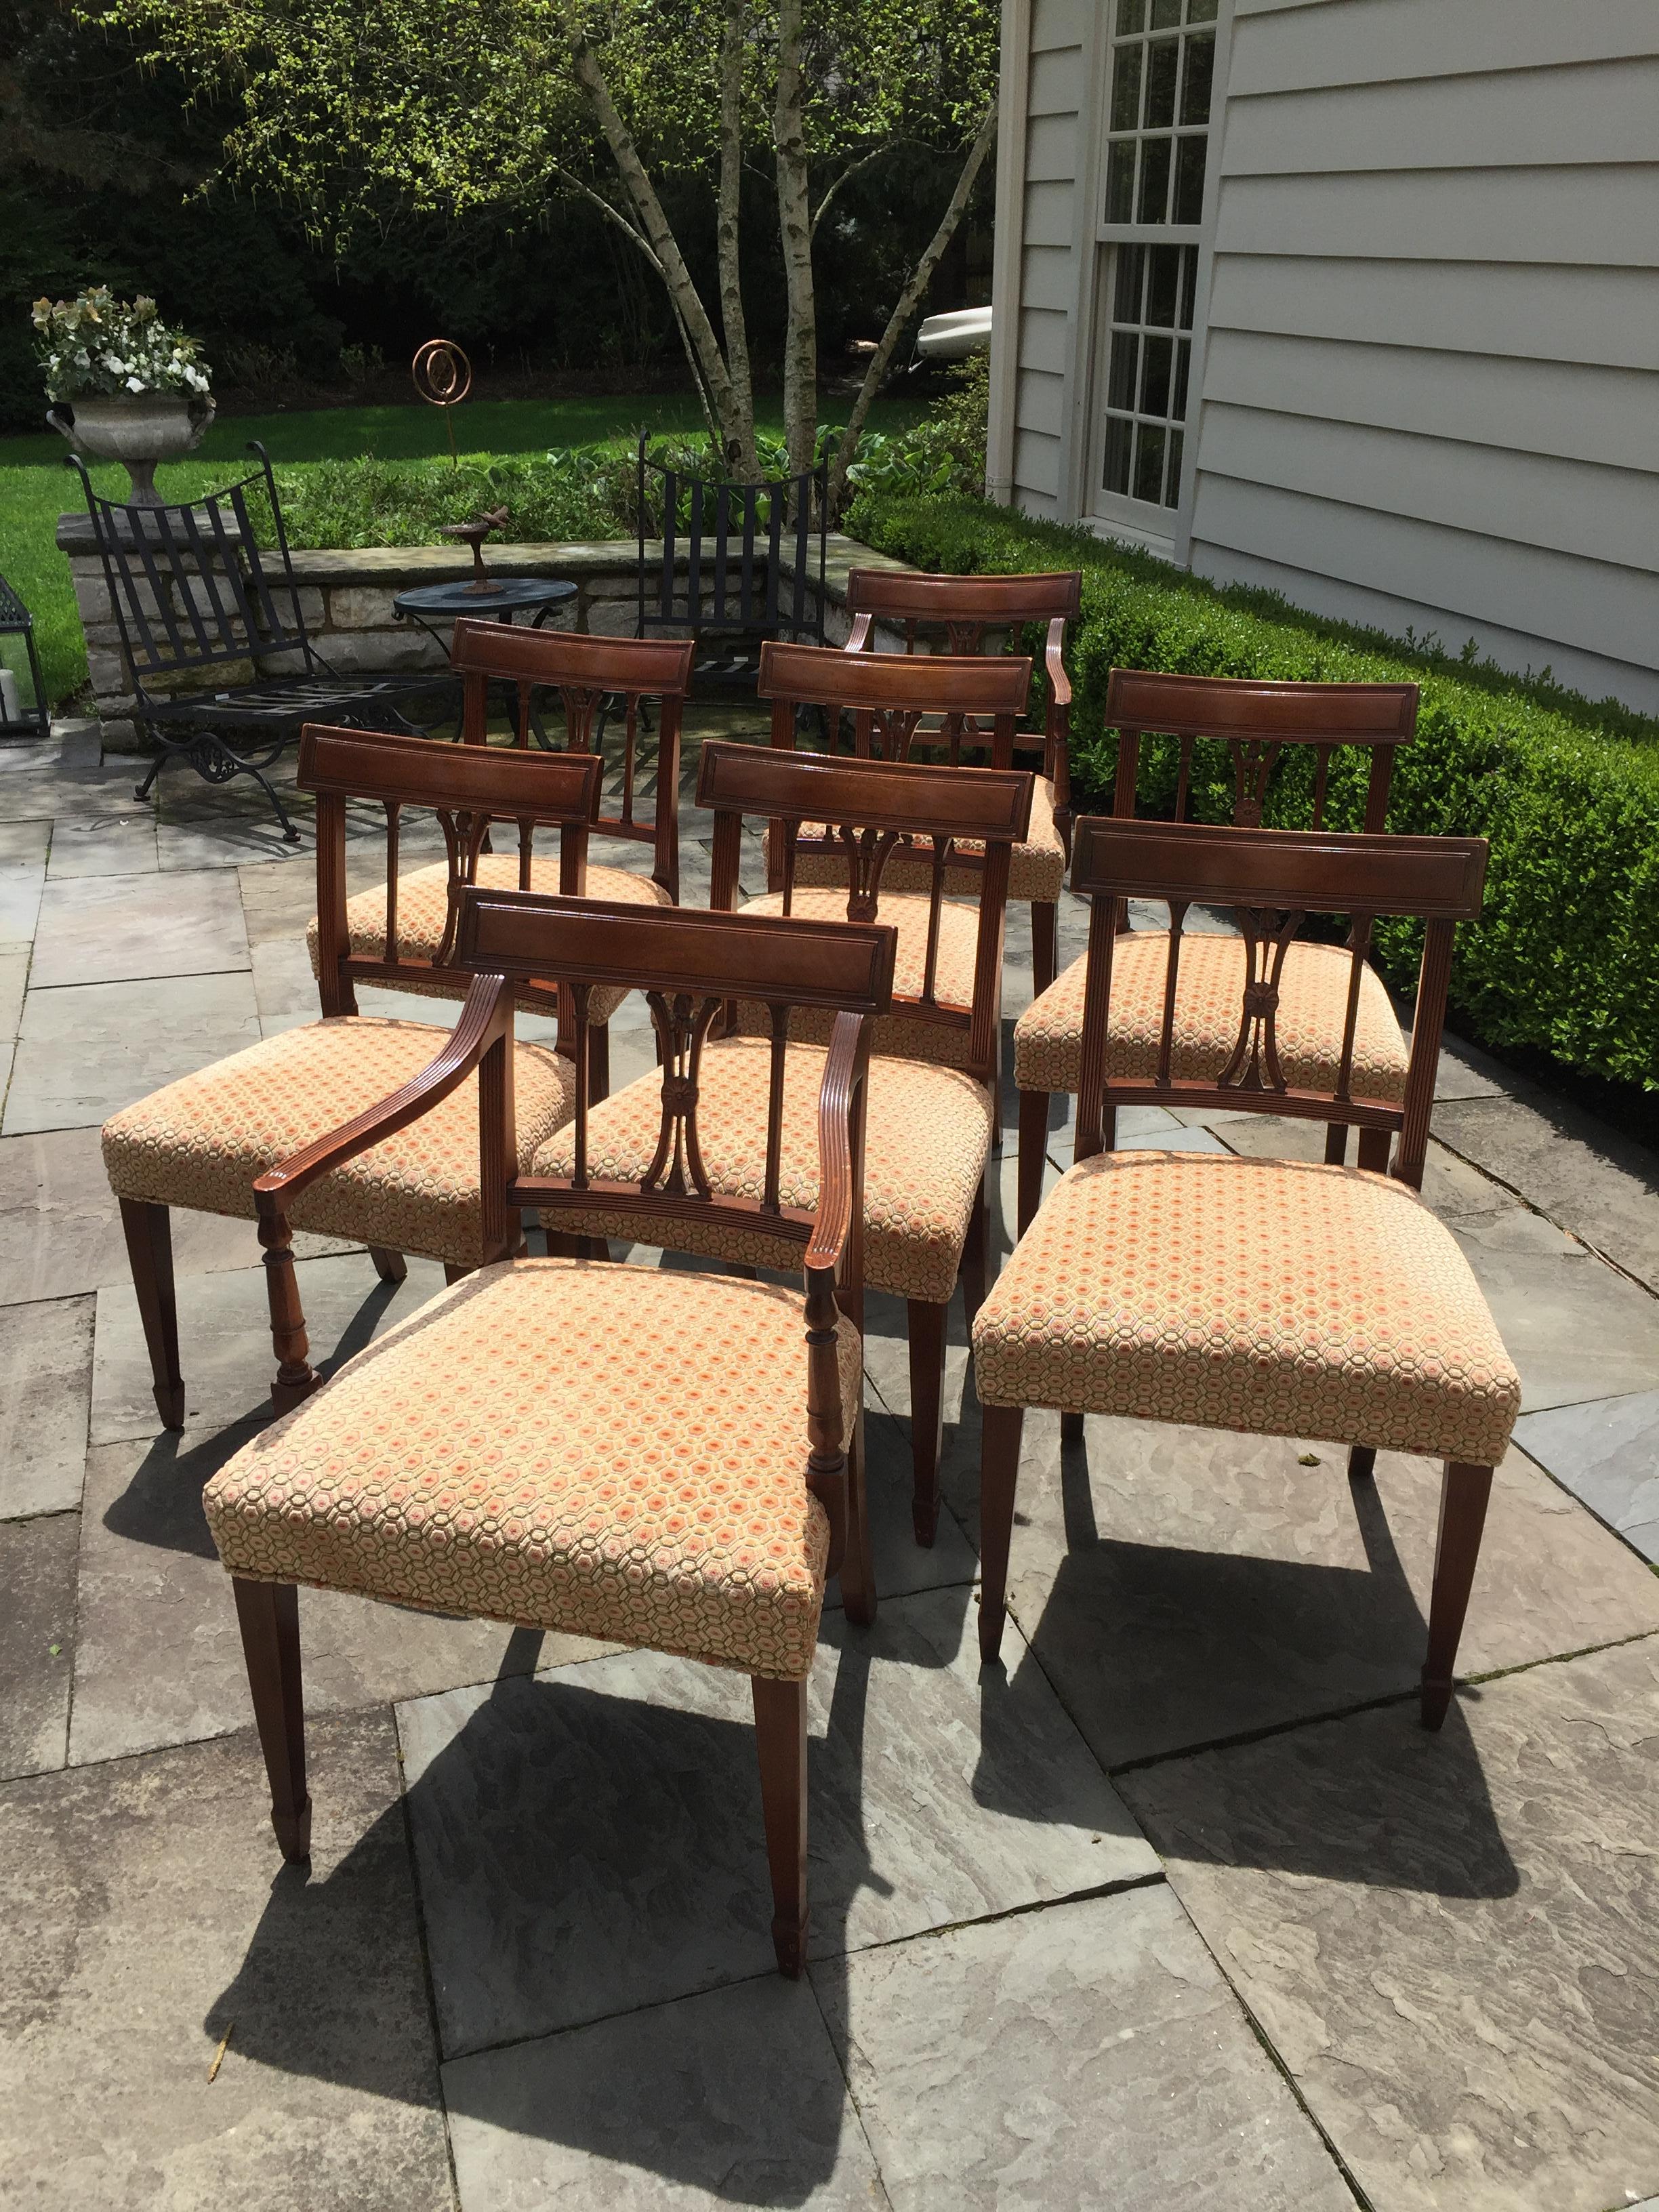 Baker Furniture Regency velvet upholstered dining chairs were purchased many years ago at a Leslie Hindman auction.
We recovered the seats in a velvet geometric pattern of red, gold, sage, brown and tan.
They are in perfect condition!
Two